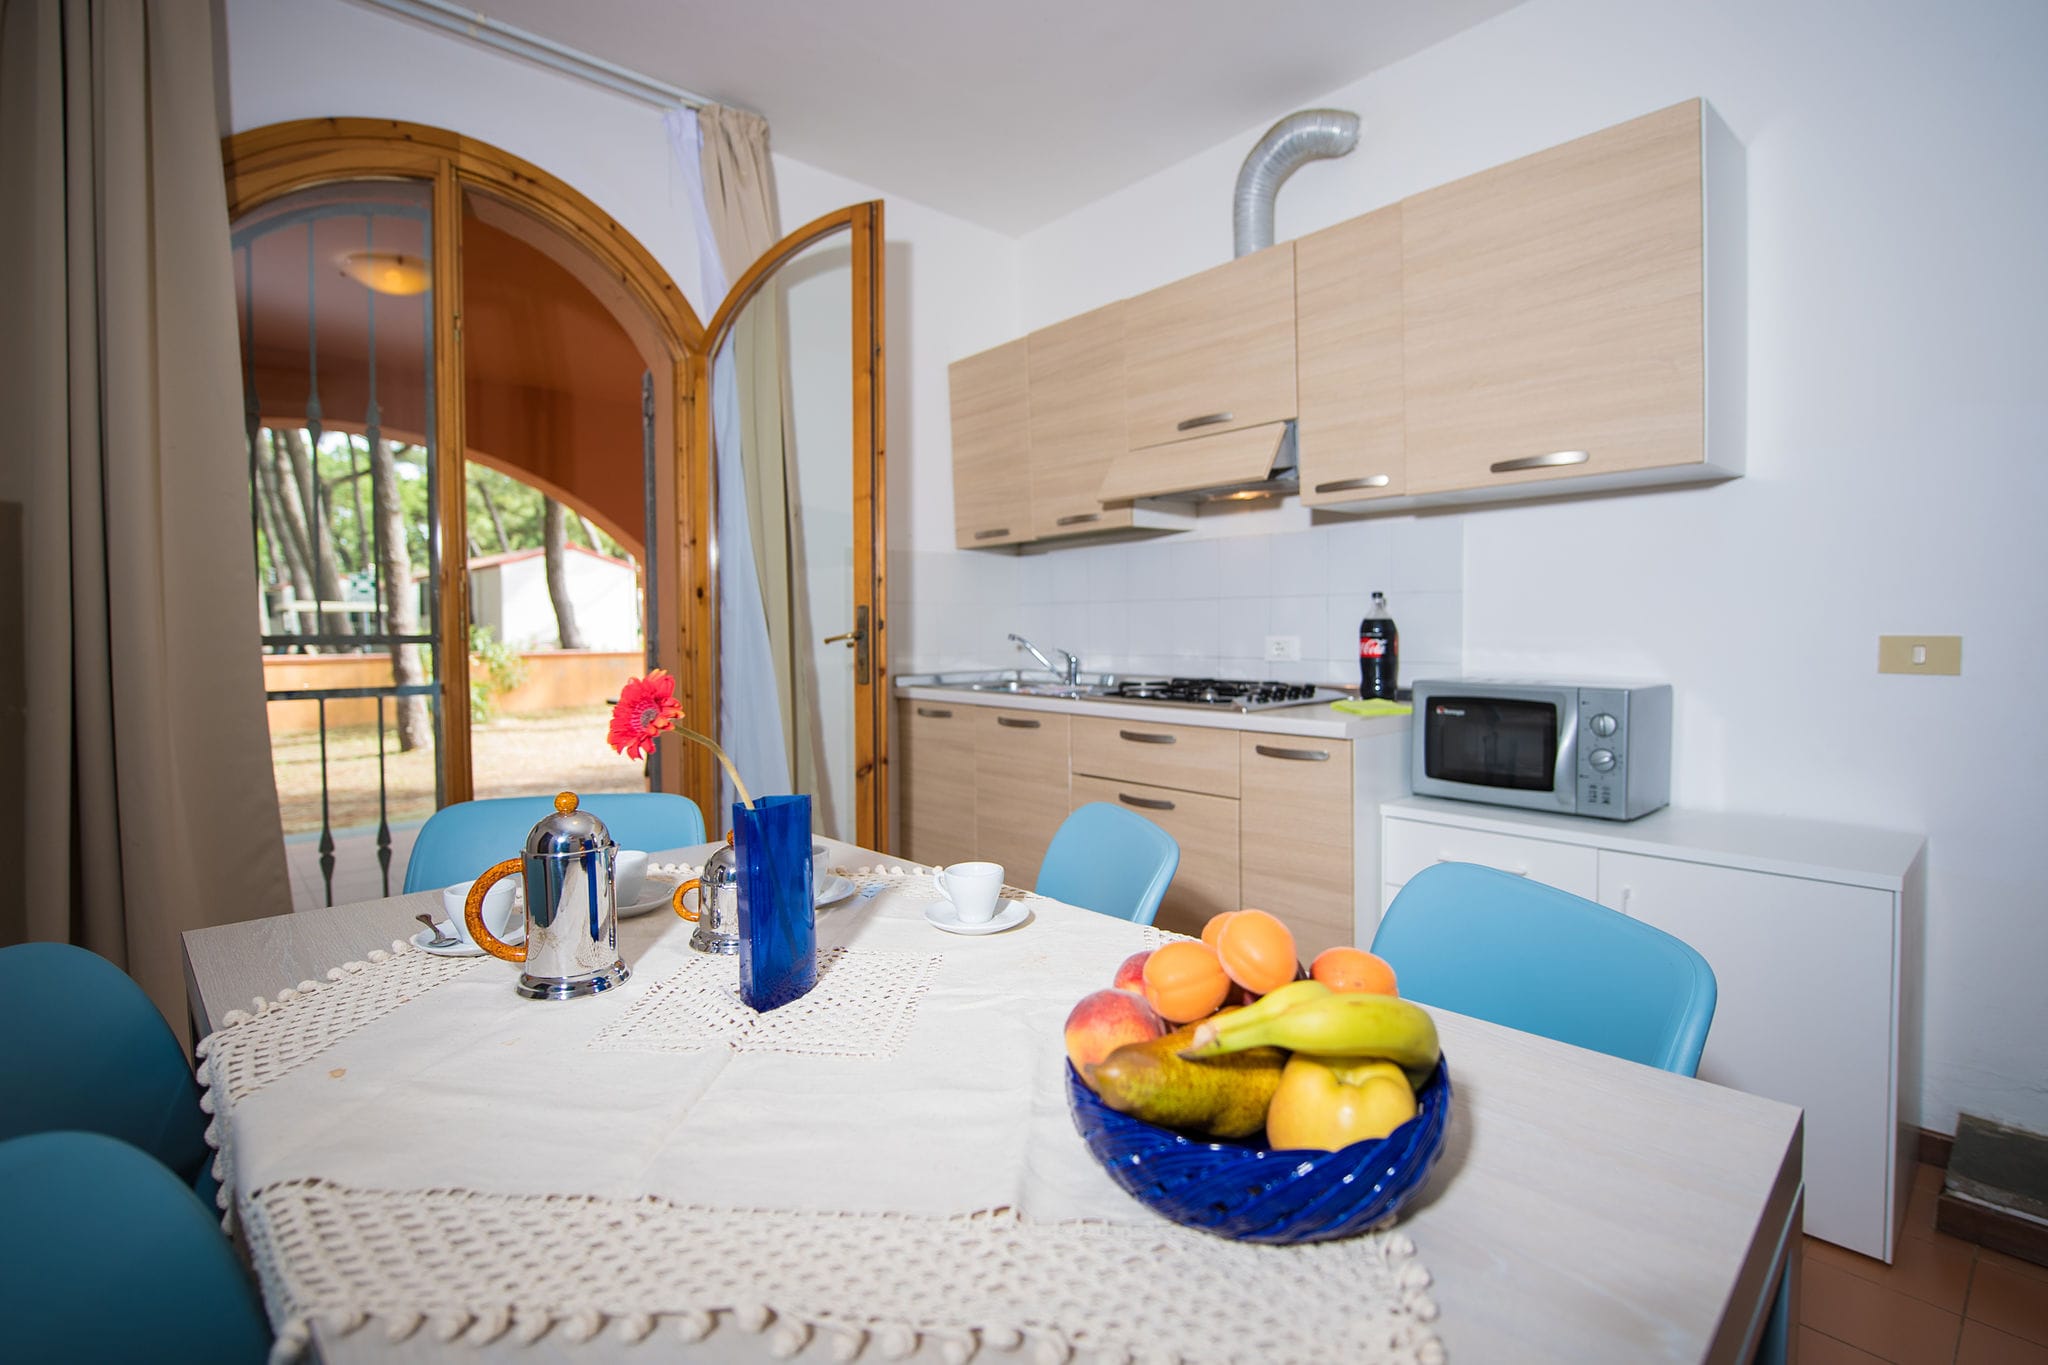 Spacious bungalow within the campsite located on the Adriatic coast